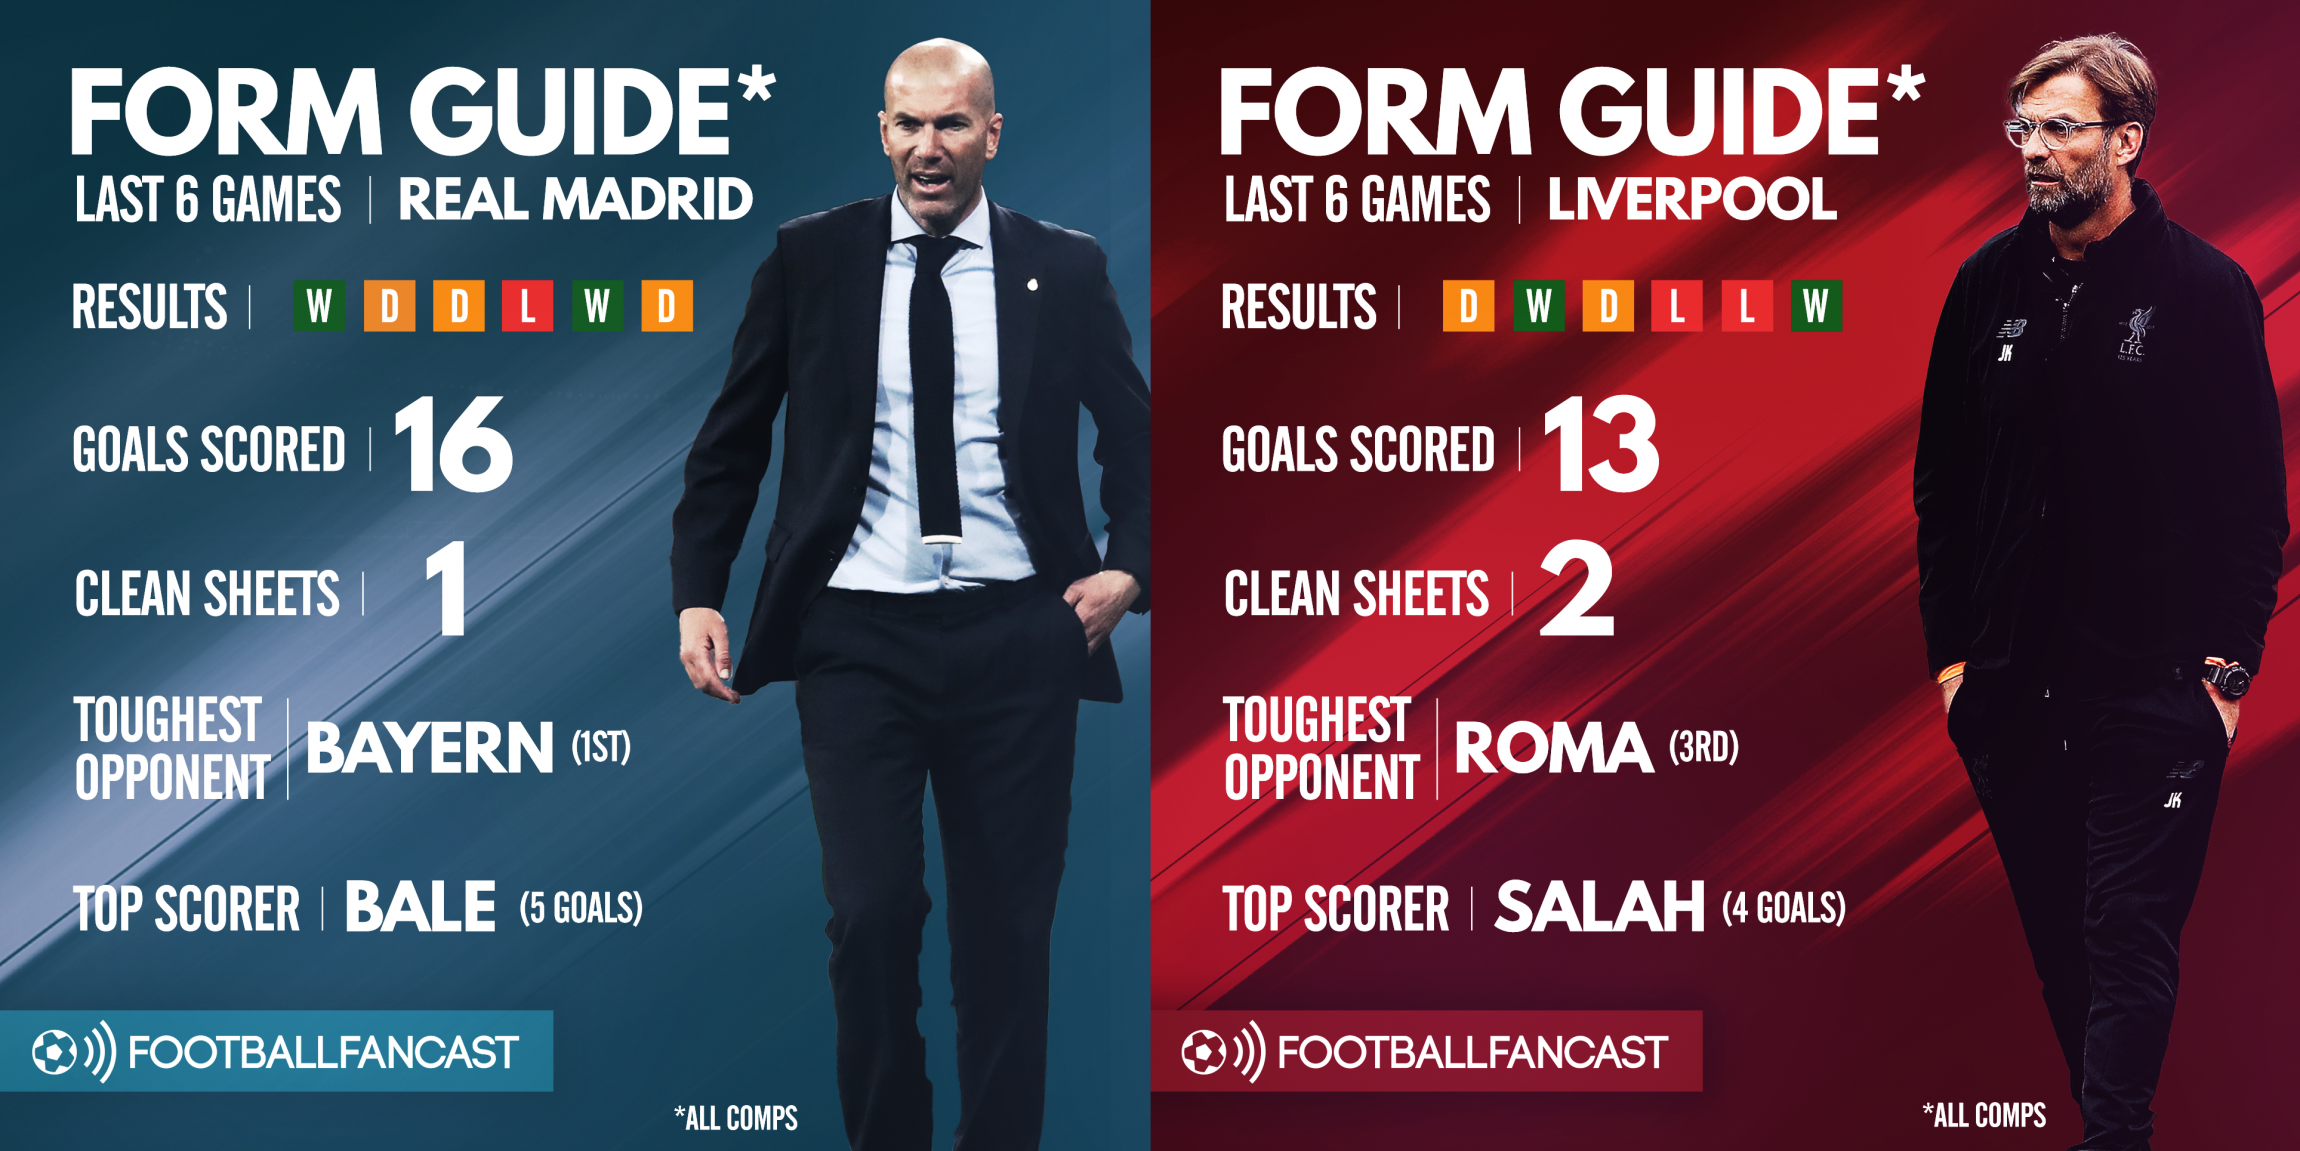 Form Guide - Real Madrid vs Liverpool